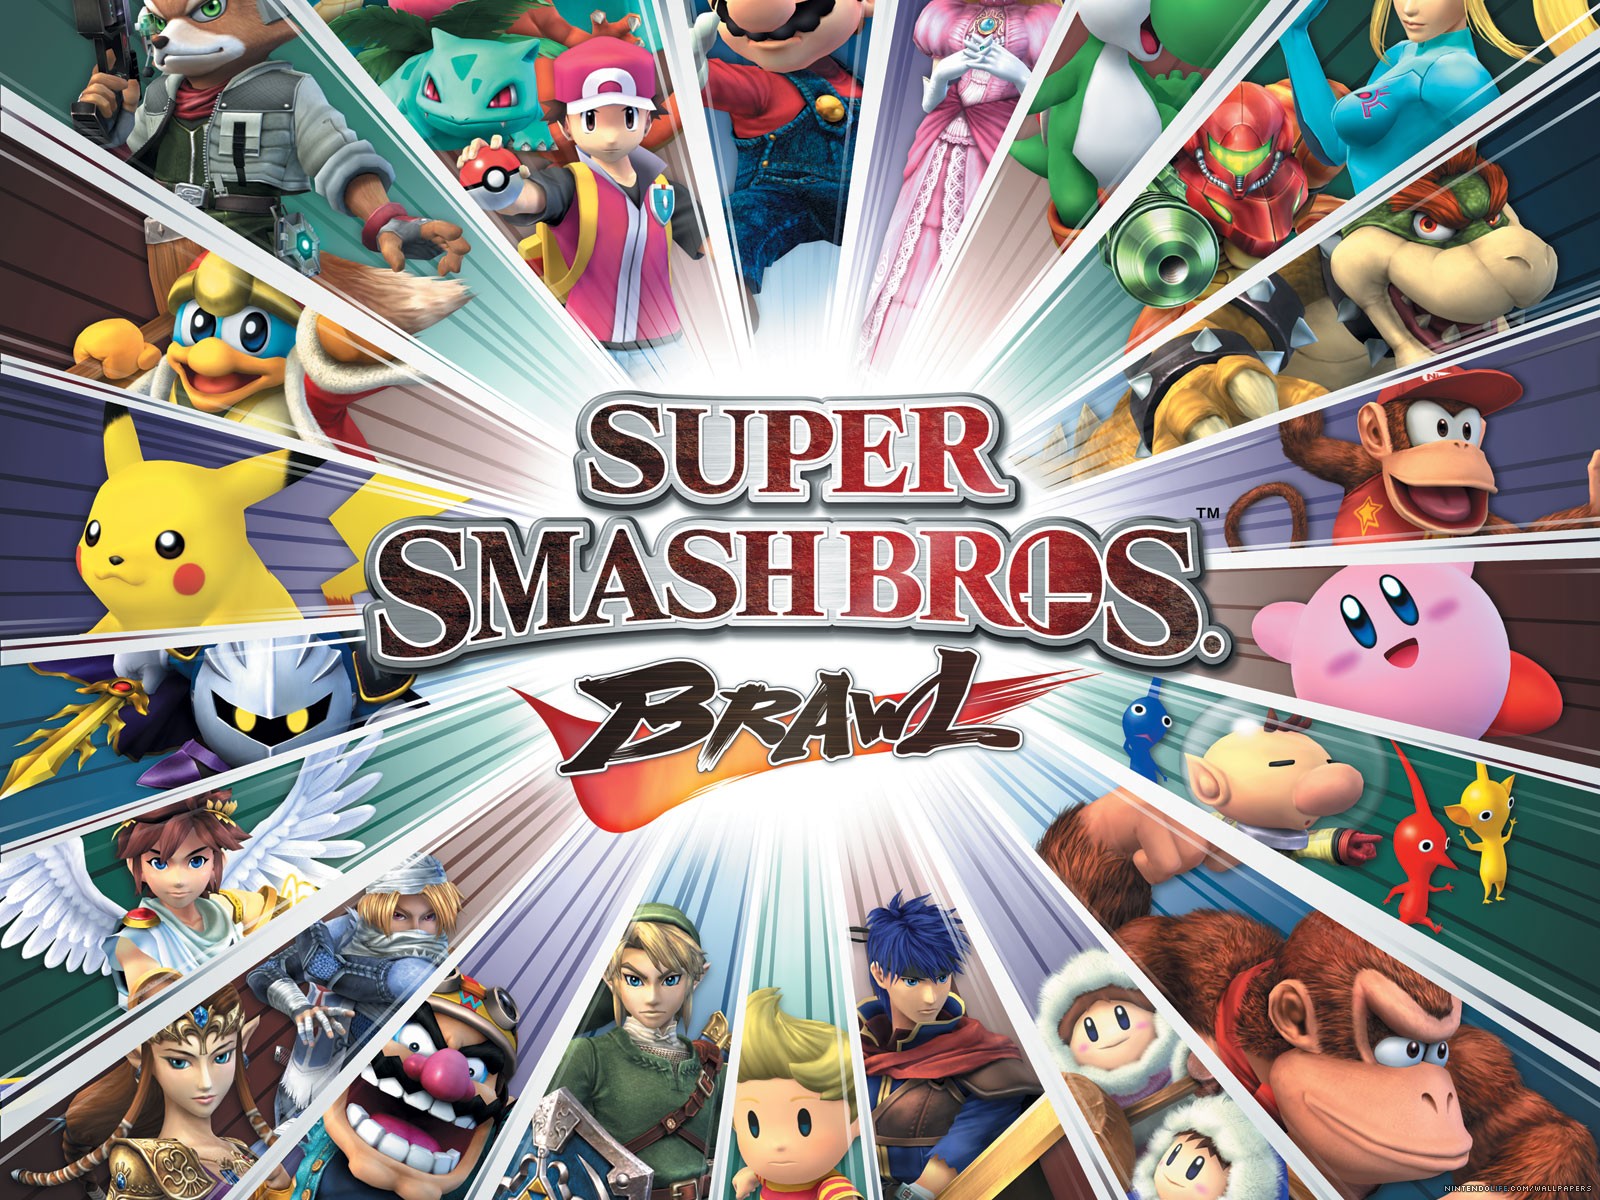 Super Smash Bros Trailer, release date and character revelations